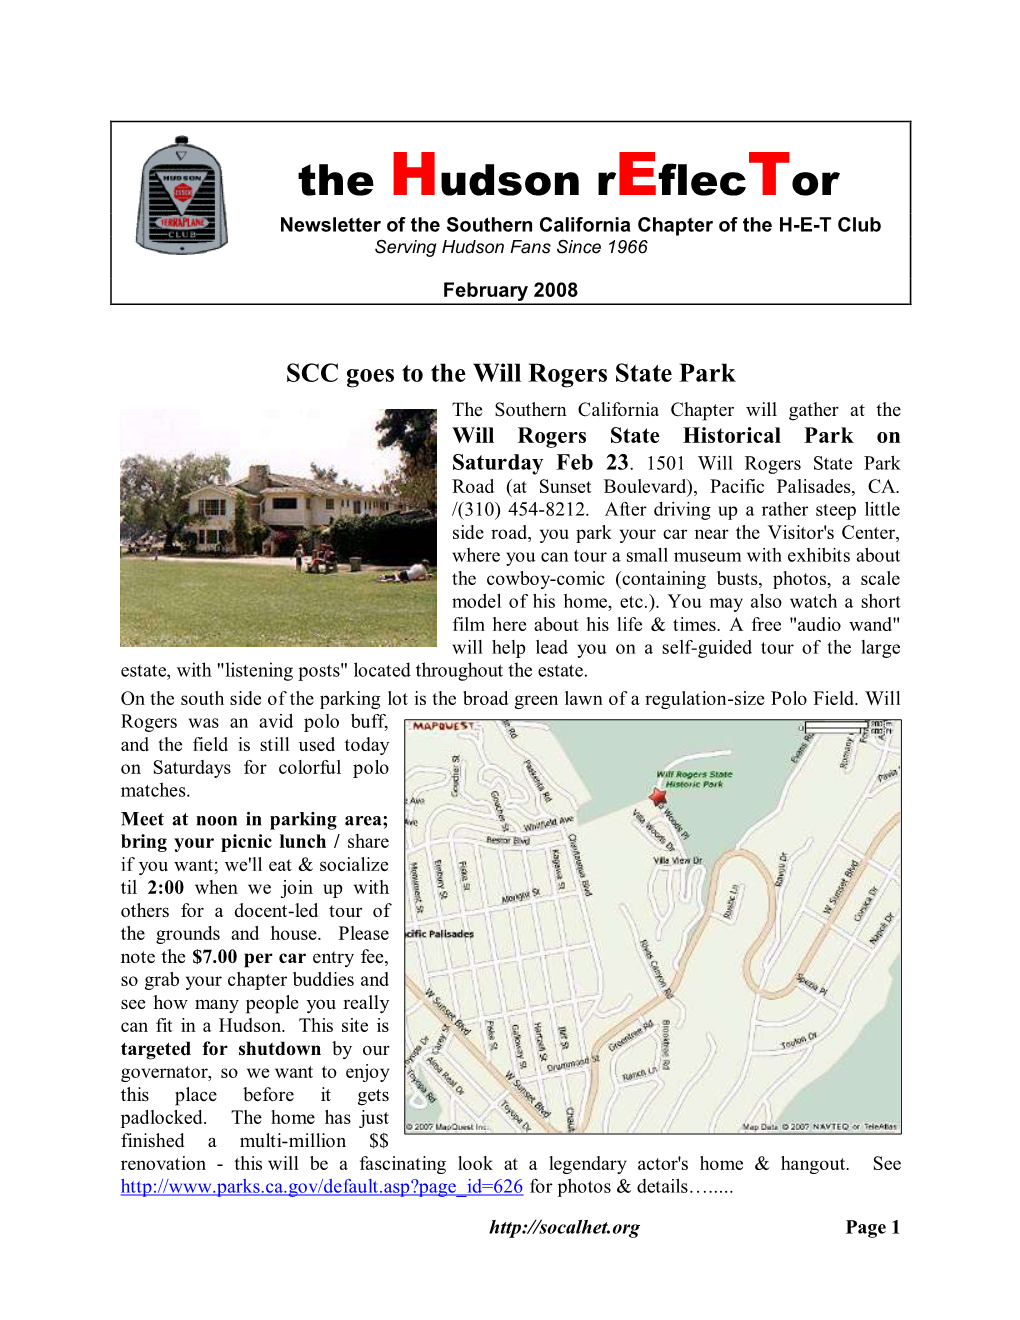 The Hudson Reflector Newsletter of the Southern California Chapter of the H-E-T Club Serving Hudson Fans Since 1966